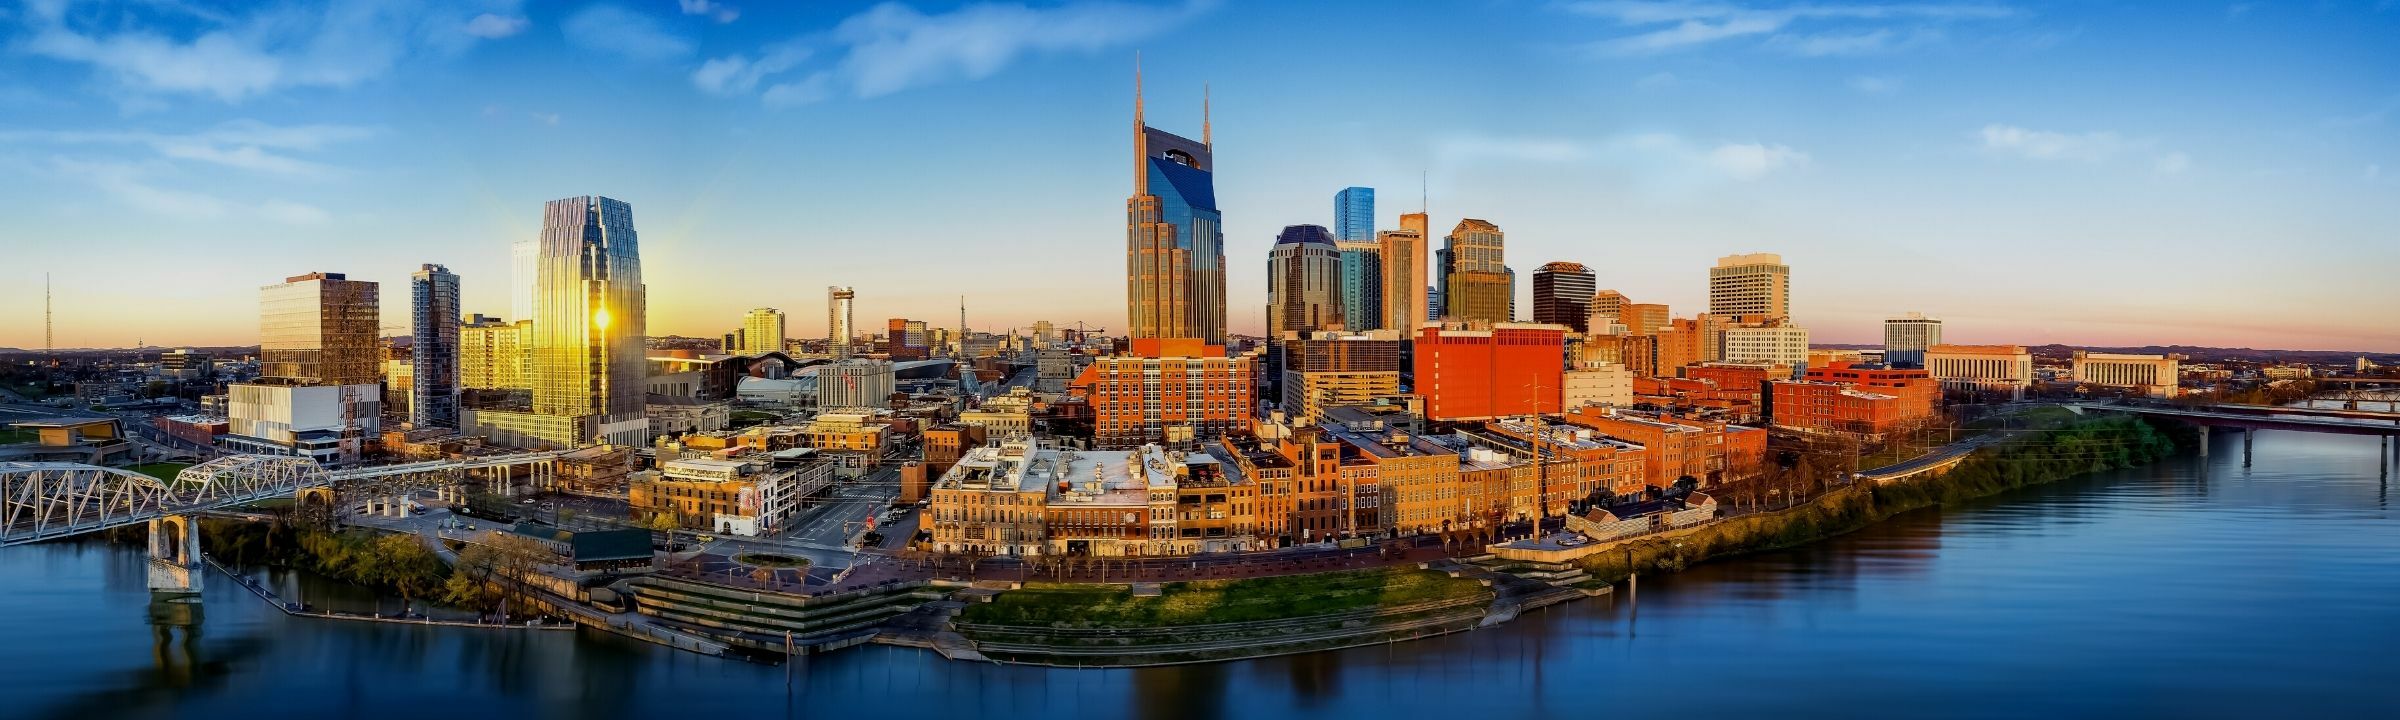 Panoramic view of Downtown Nashville Tennessee skyline